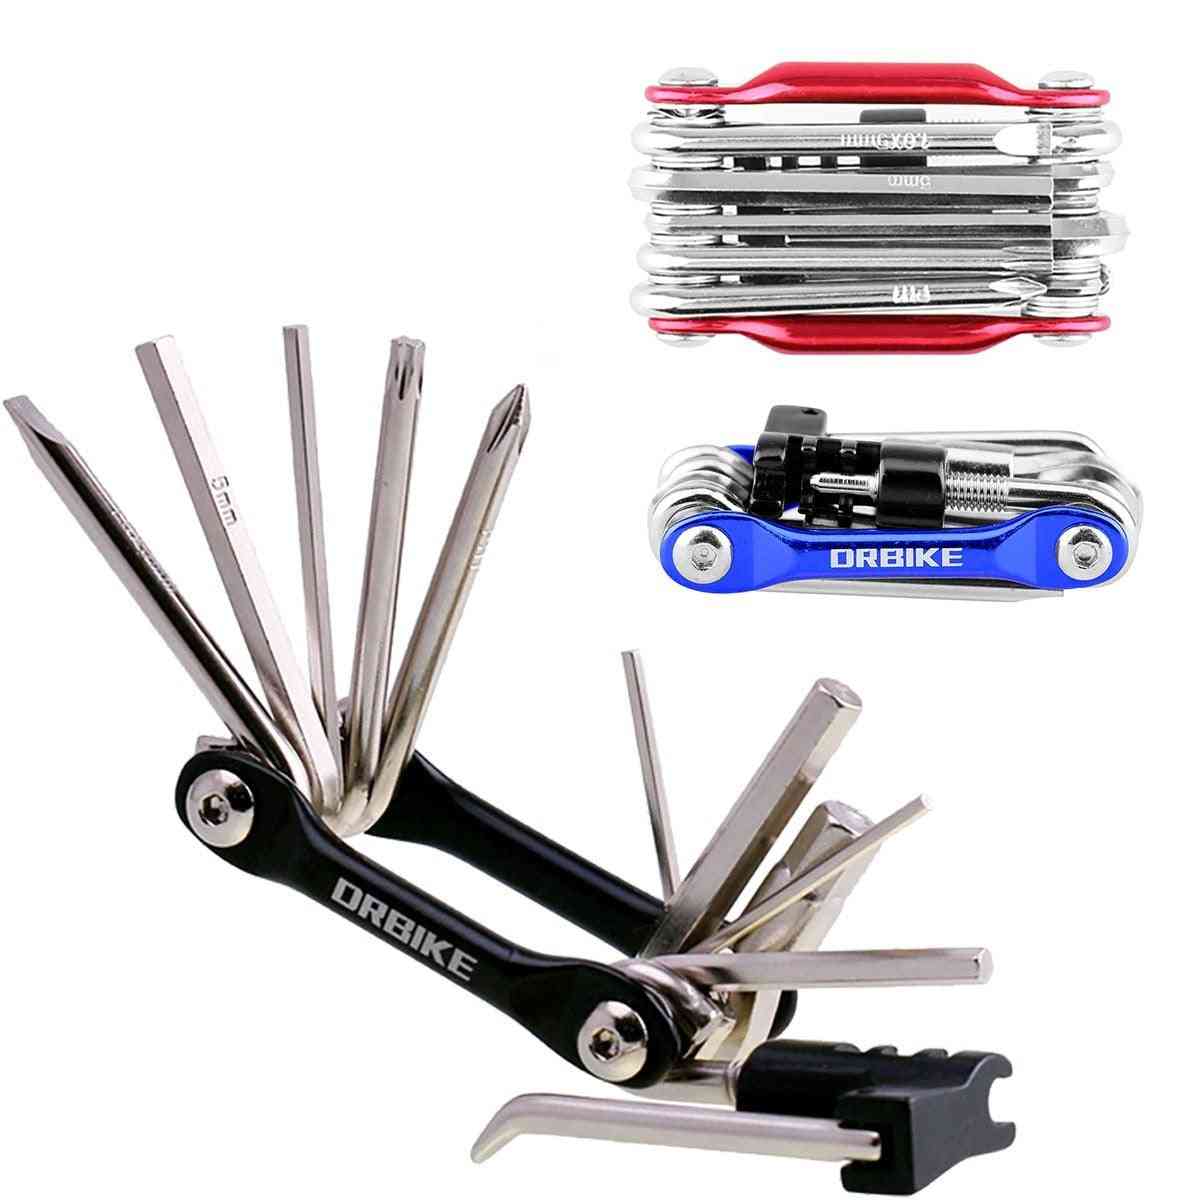 Bicycle Multifunction Tire Repair Tool -set With Screwdriver